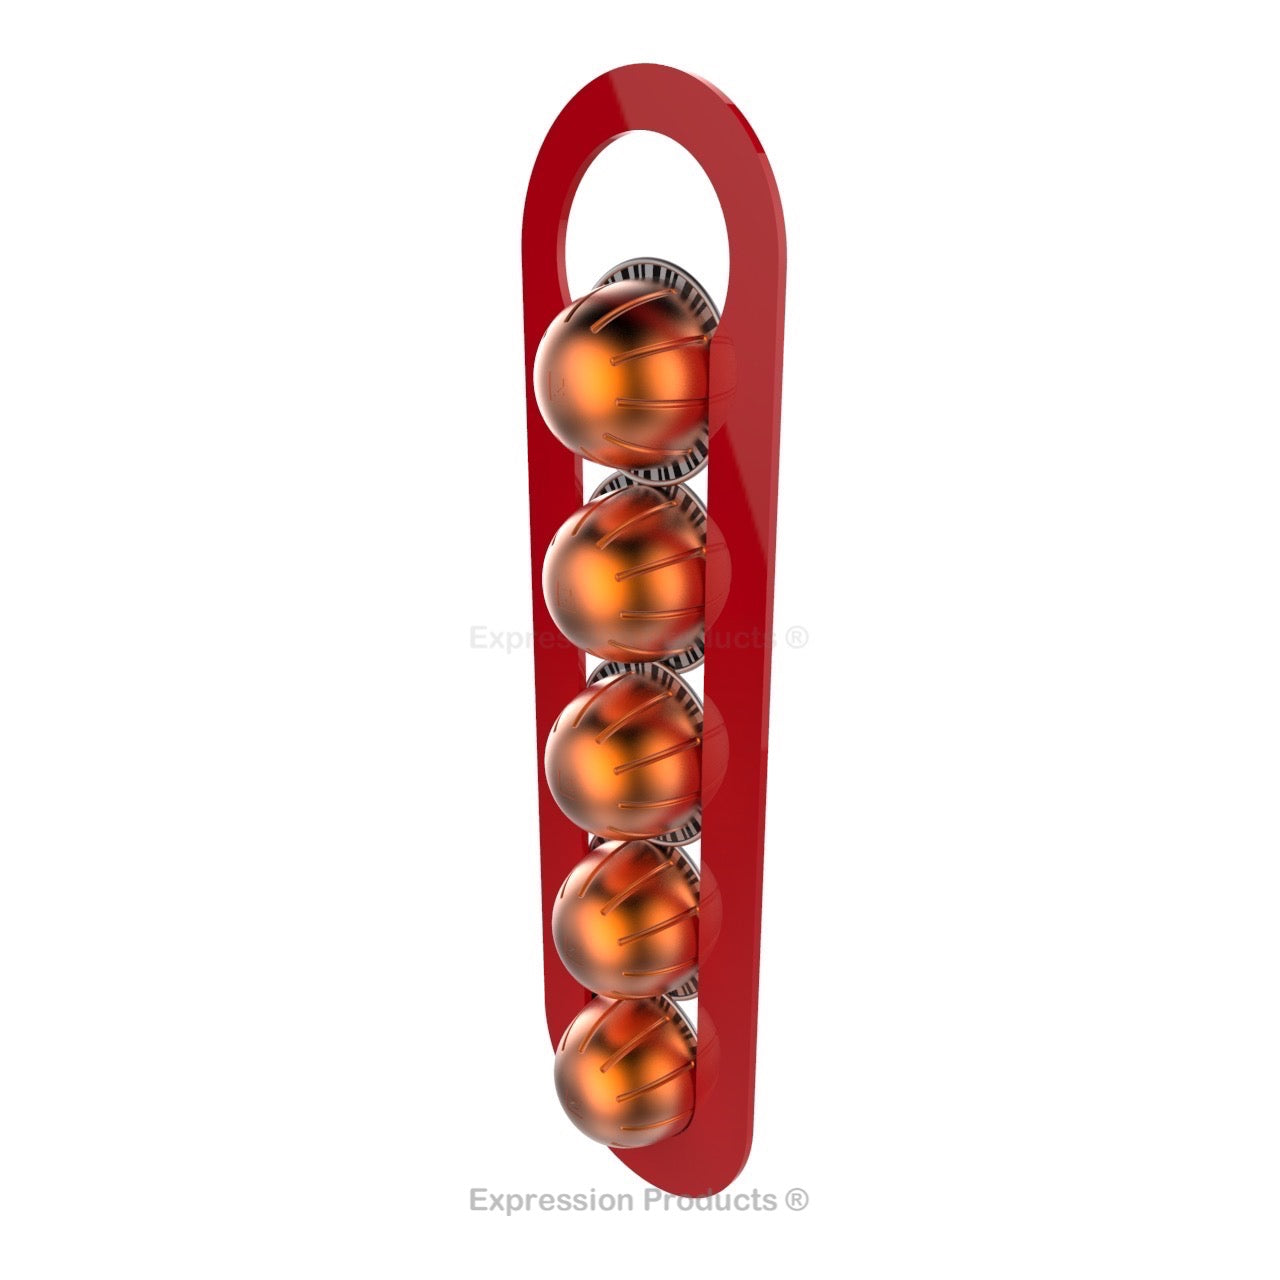 Magnetic Nespresso Vertuo capsule holder shown in red holding 5 pods